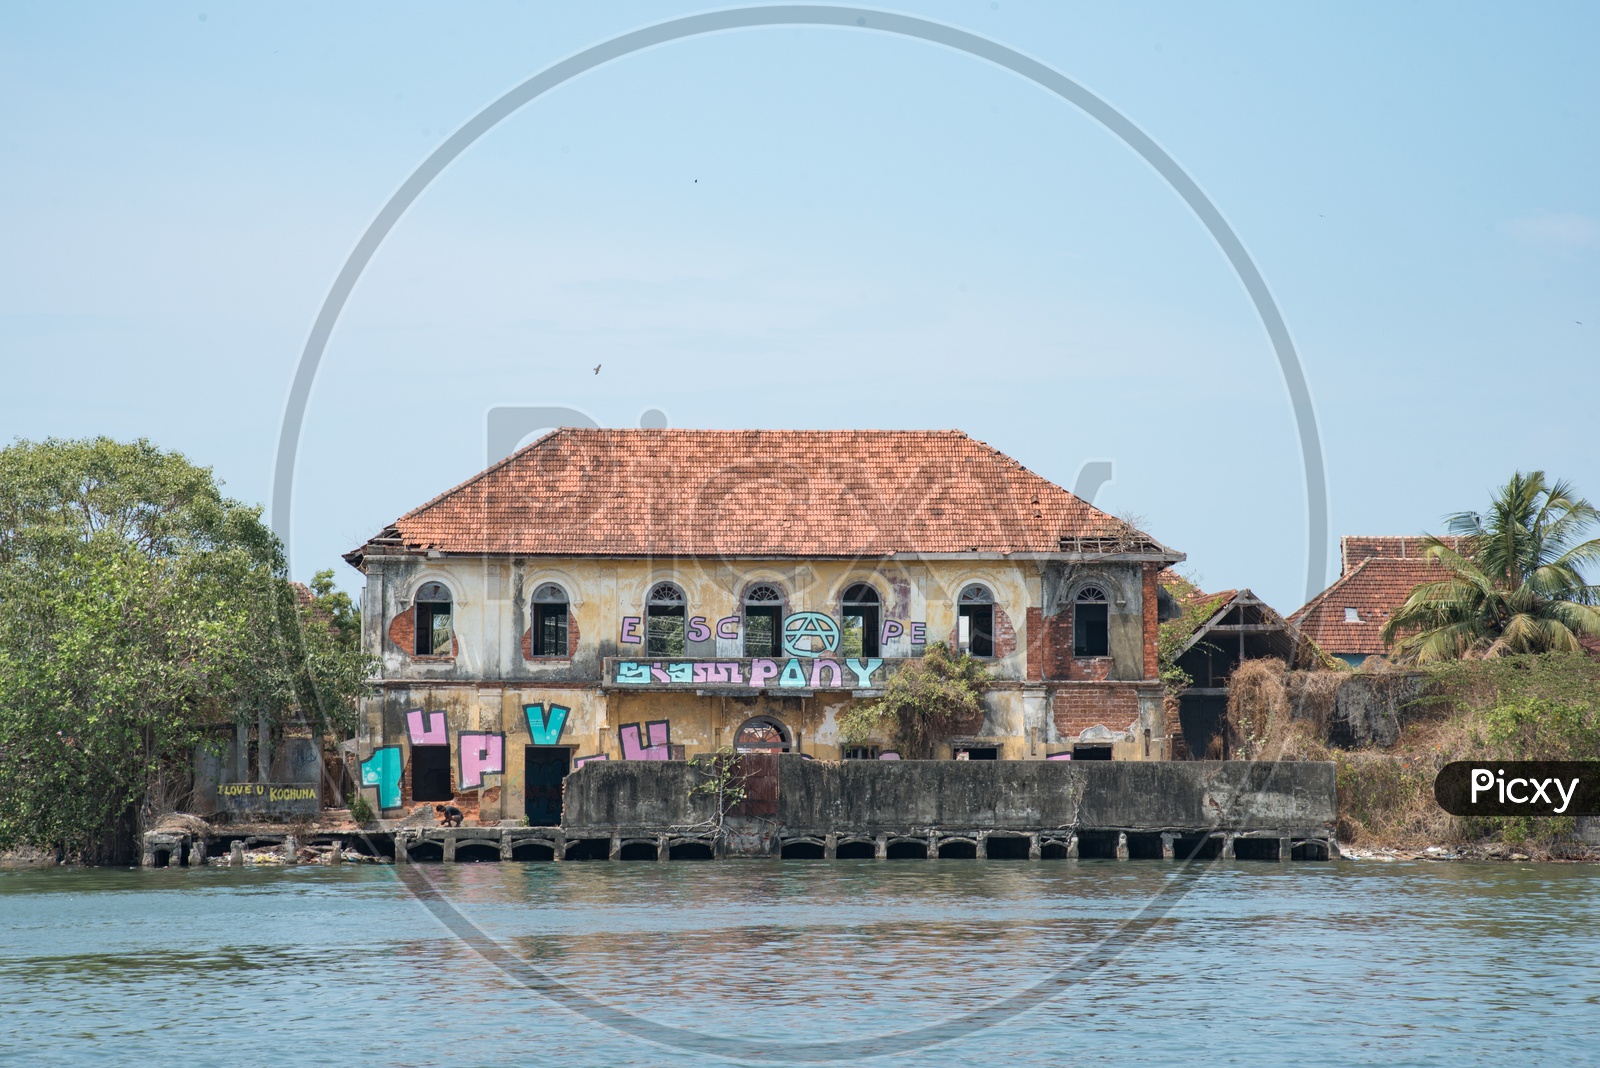 An abandoned place in Mattancherry covere with Graffiti Art, Kochi